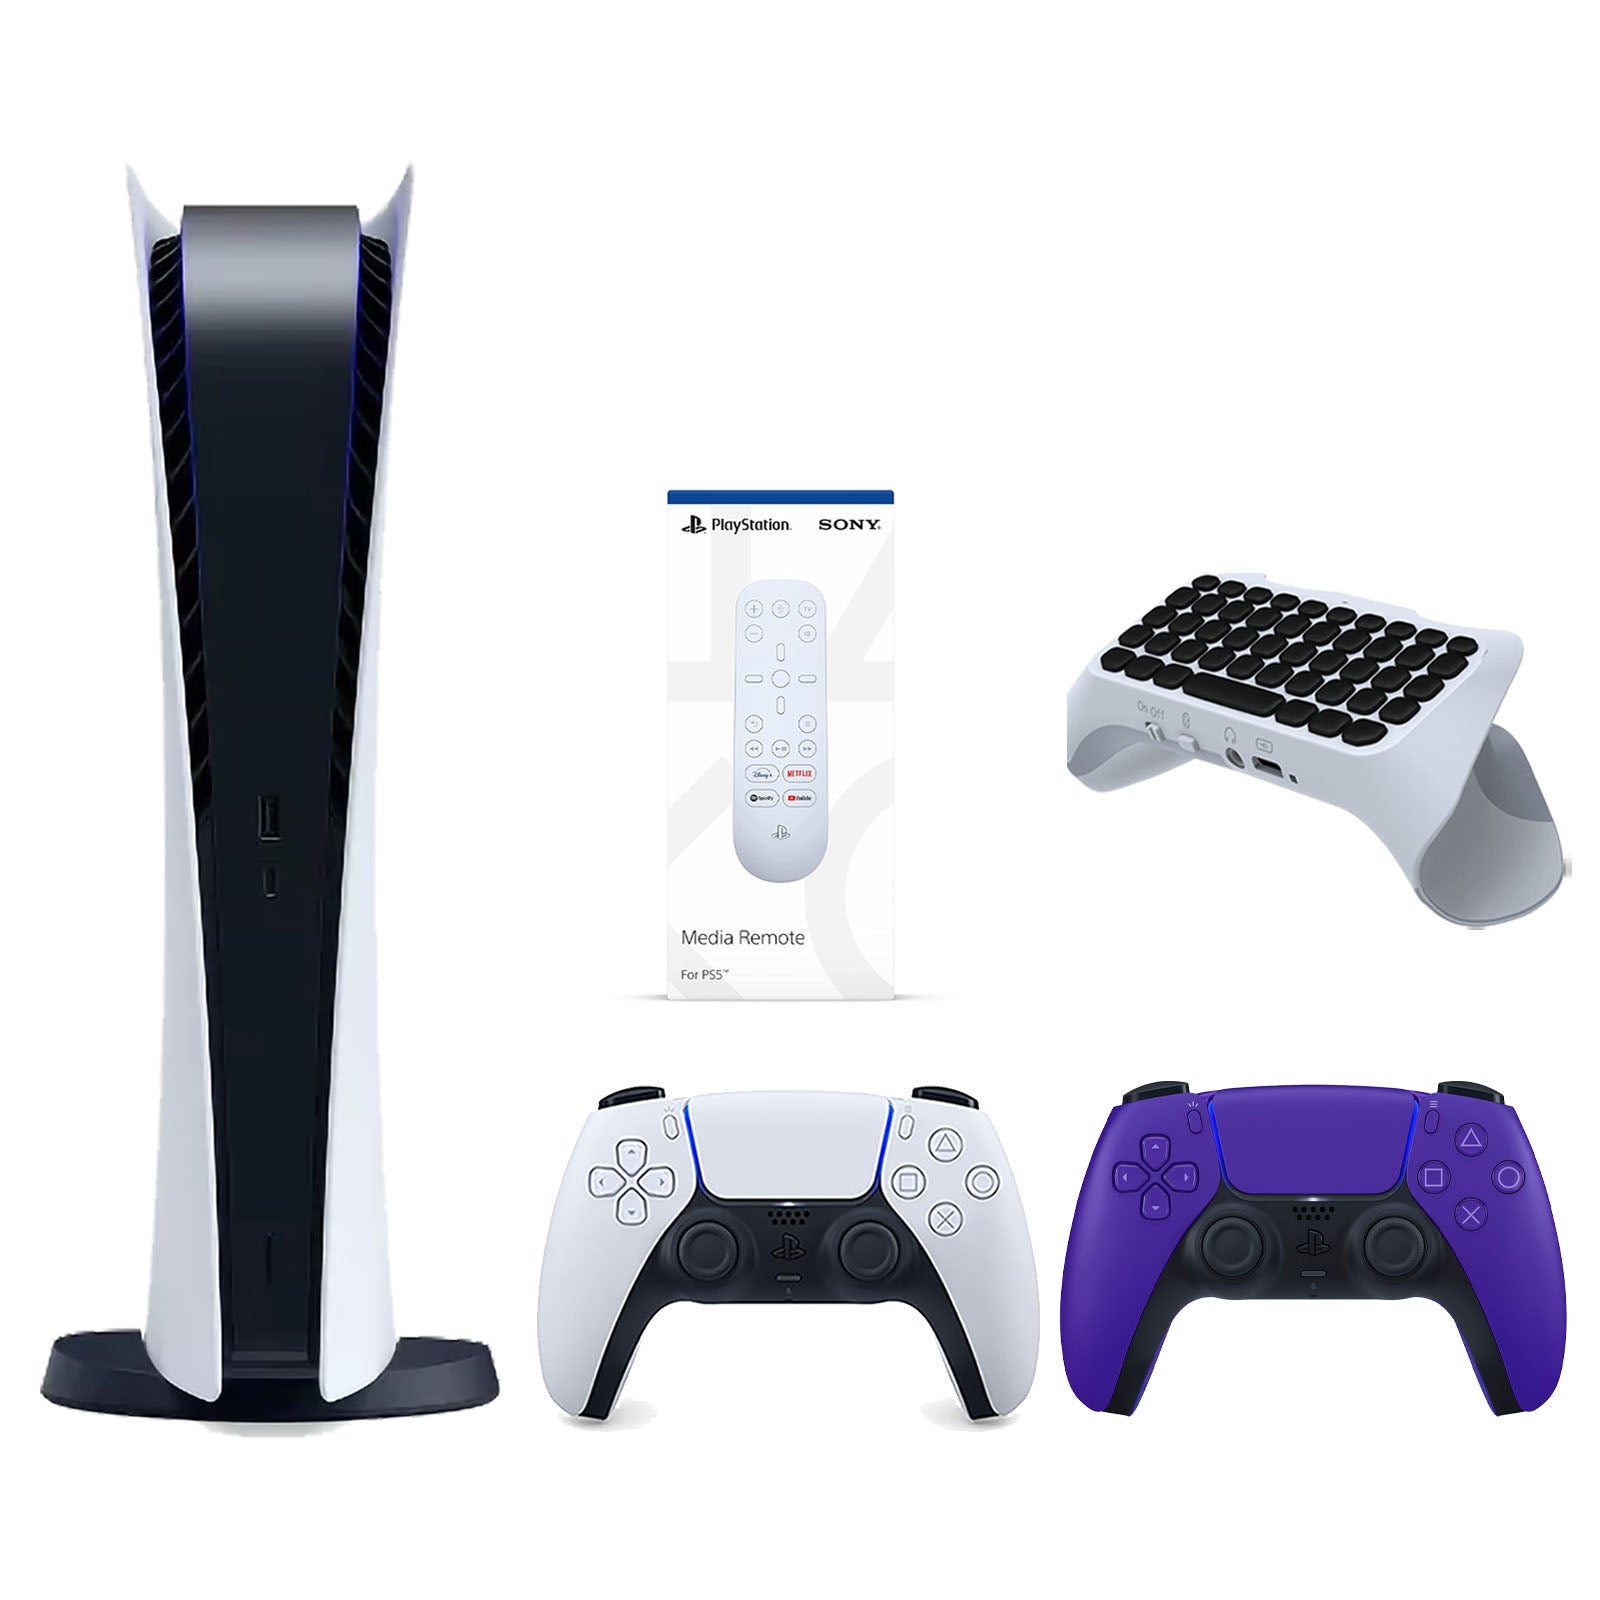 Sony Playstation 5 Digital Edition Console with Extra Purple Controller, Media Remote and Surge QuickType 2.0 Wireless PS5 Controller Keypad Bundle - Pro-Distributing